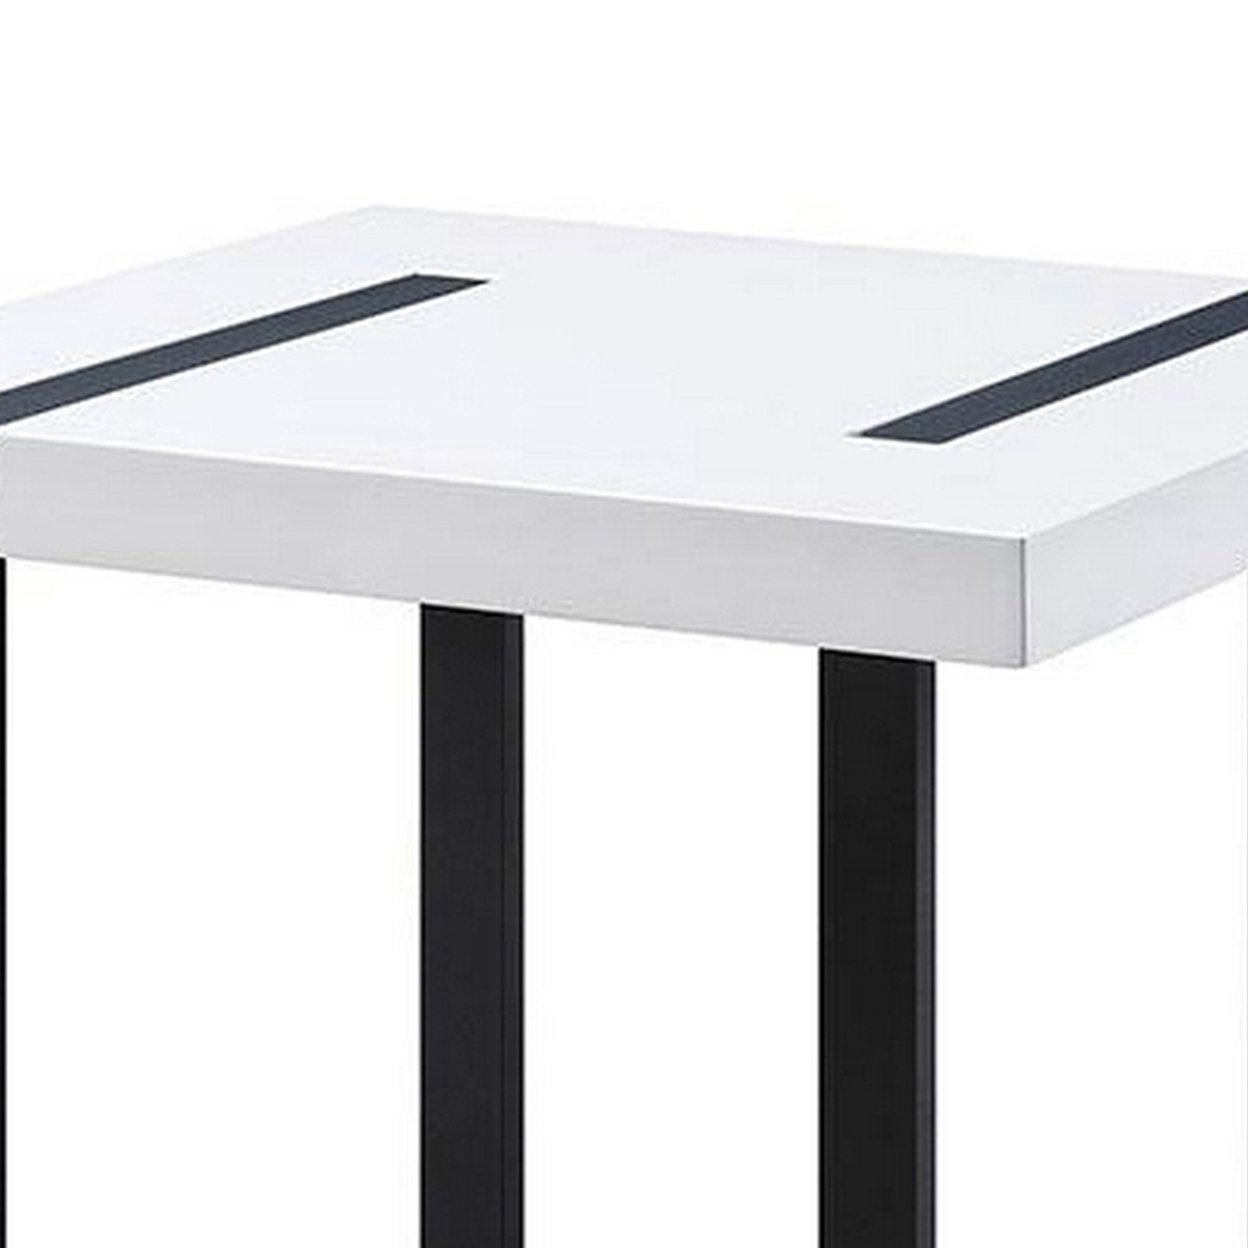 Two Tone Modern End Table With Metal Legs, White And Black- Saltoro Sherpi